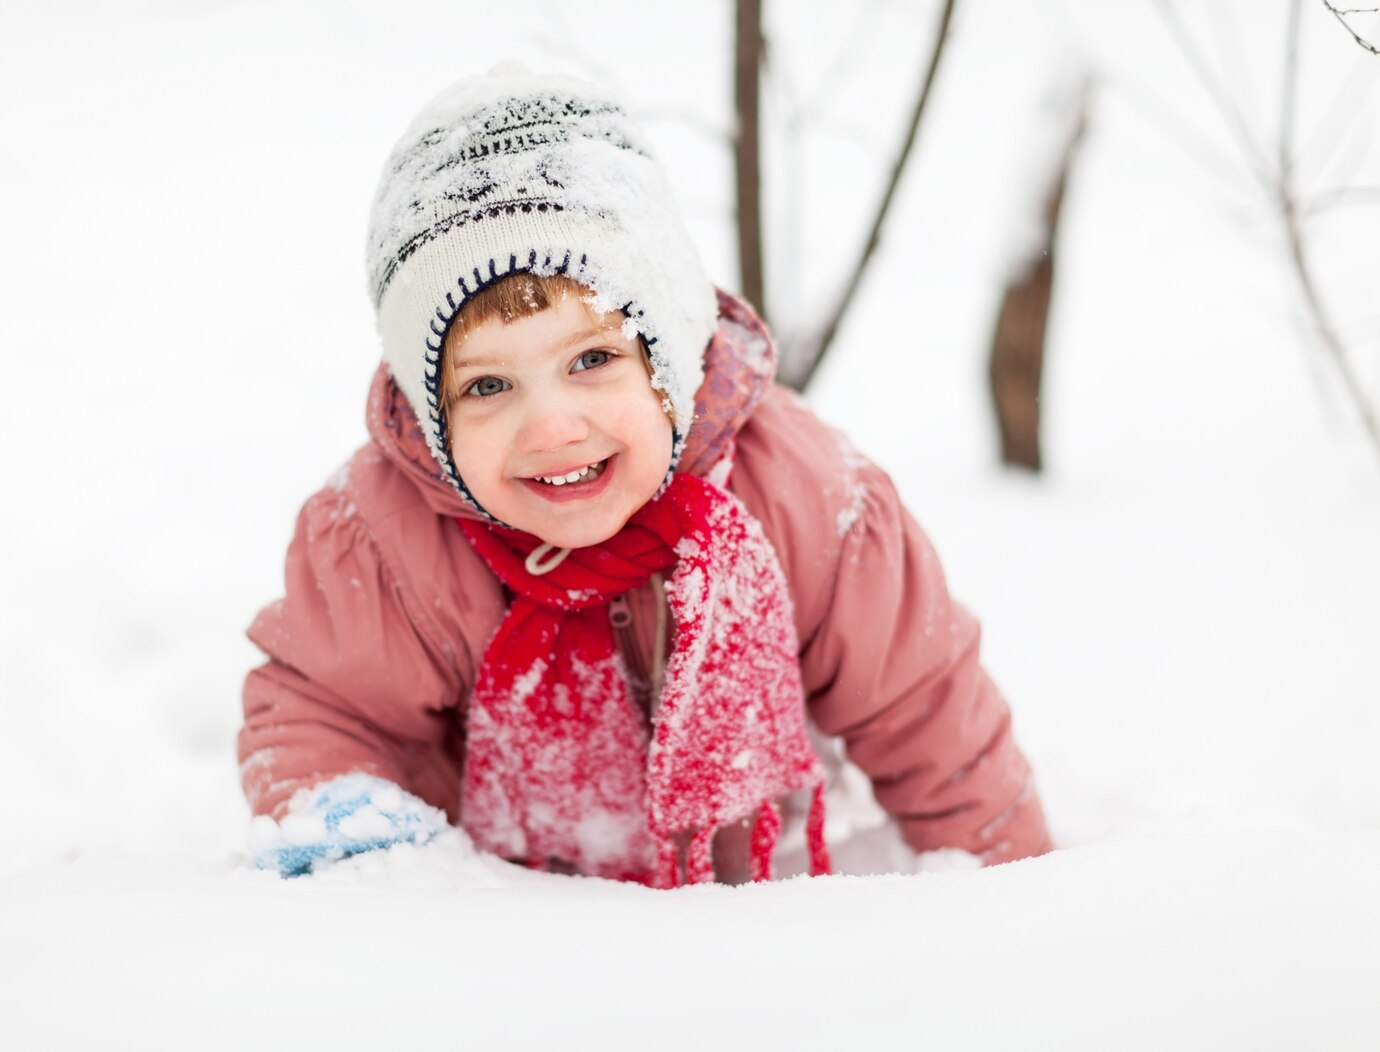 A cute child in the snow laughing joyfully.